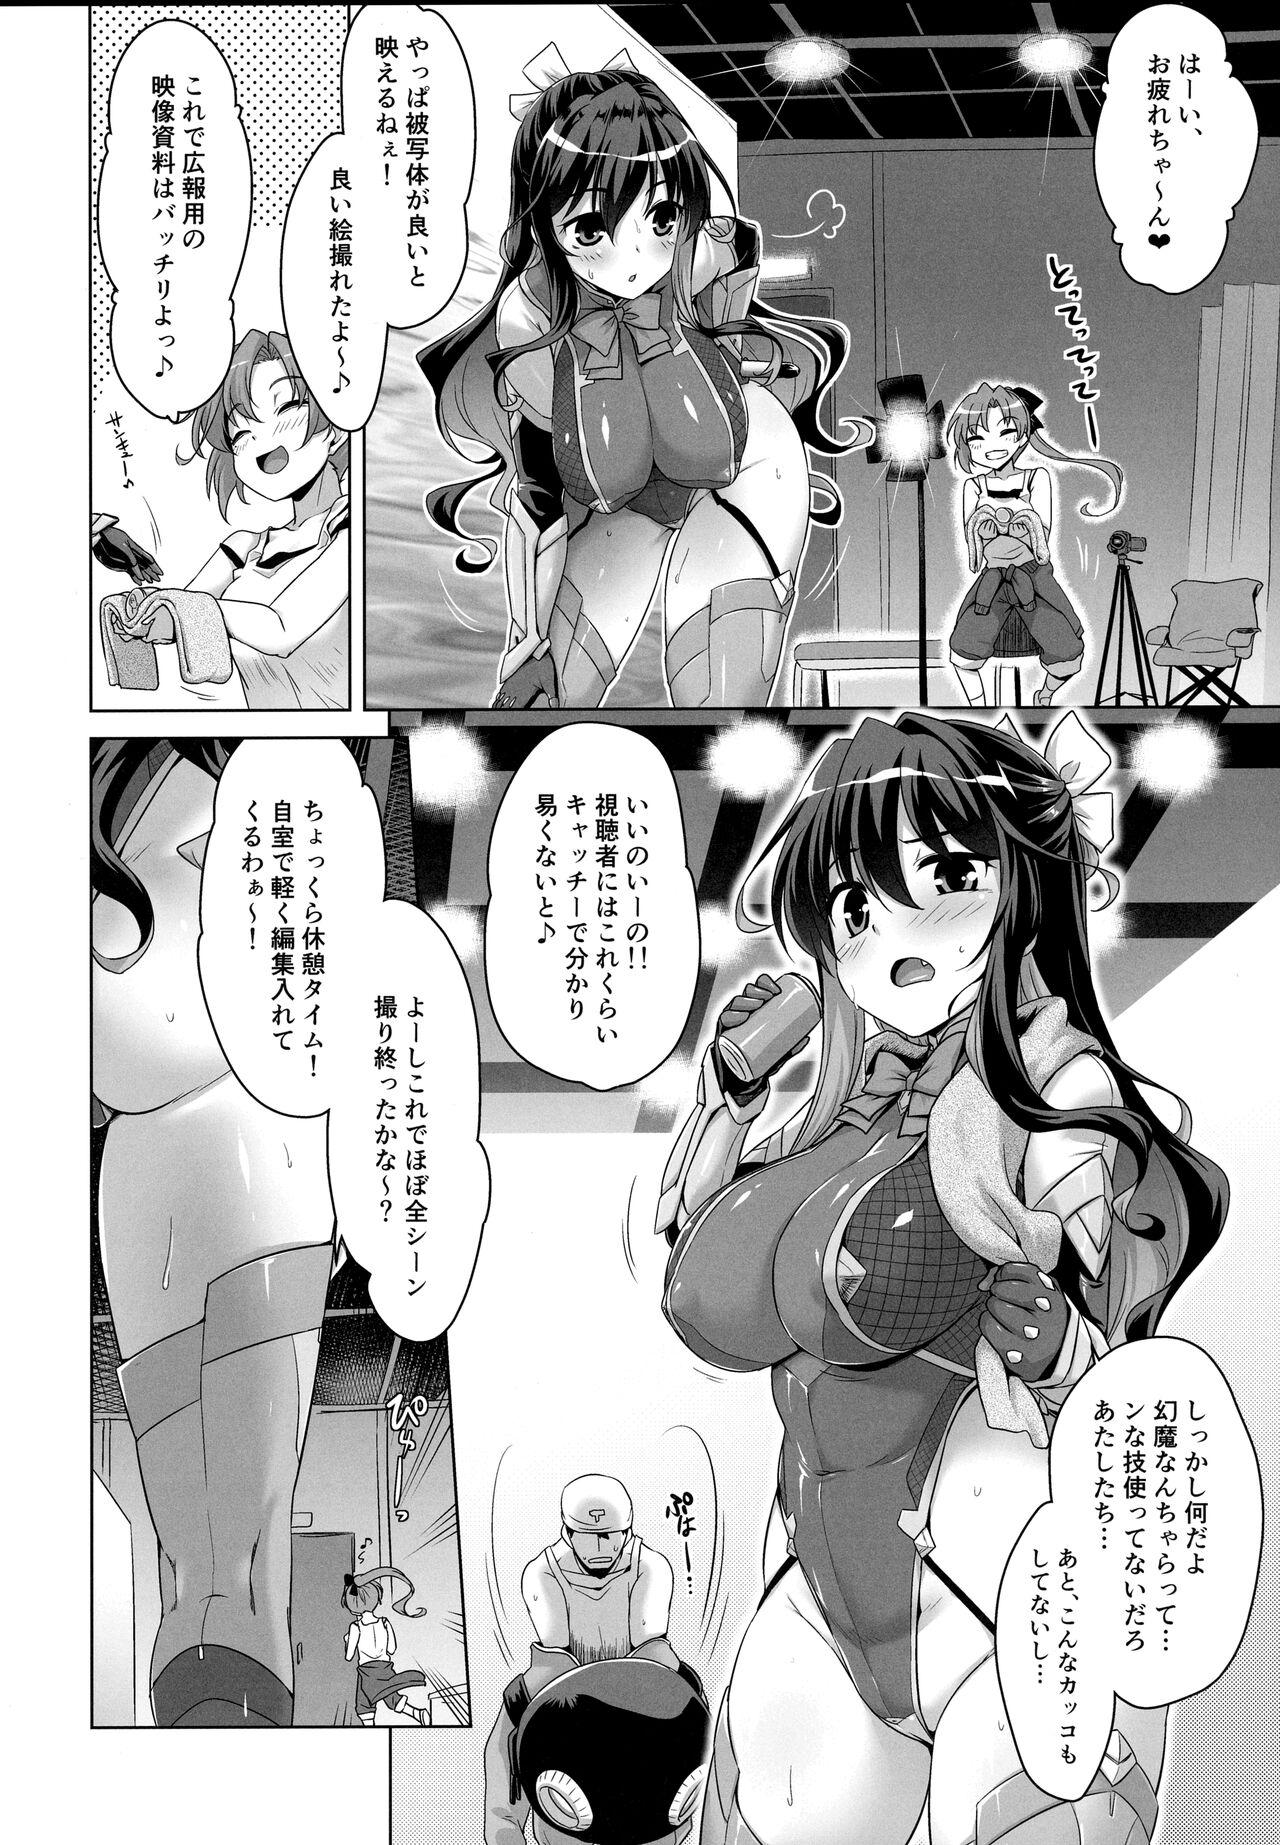 Plump みるきーDD～長波After shooting～ - Kantai collection Movie - Page 3